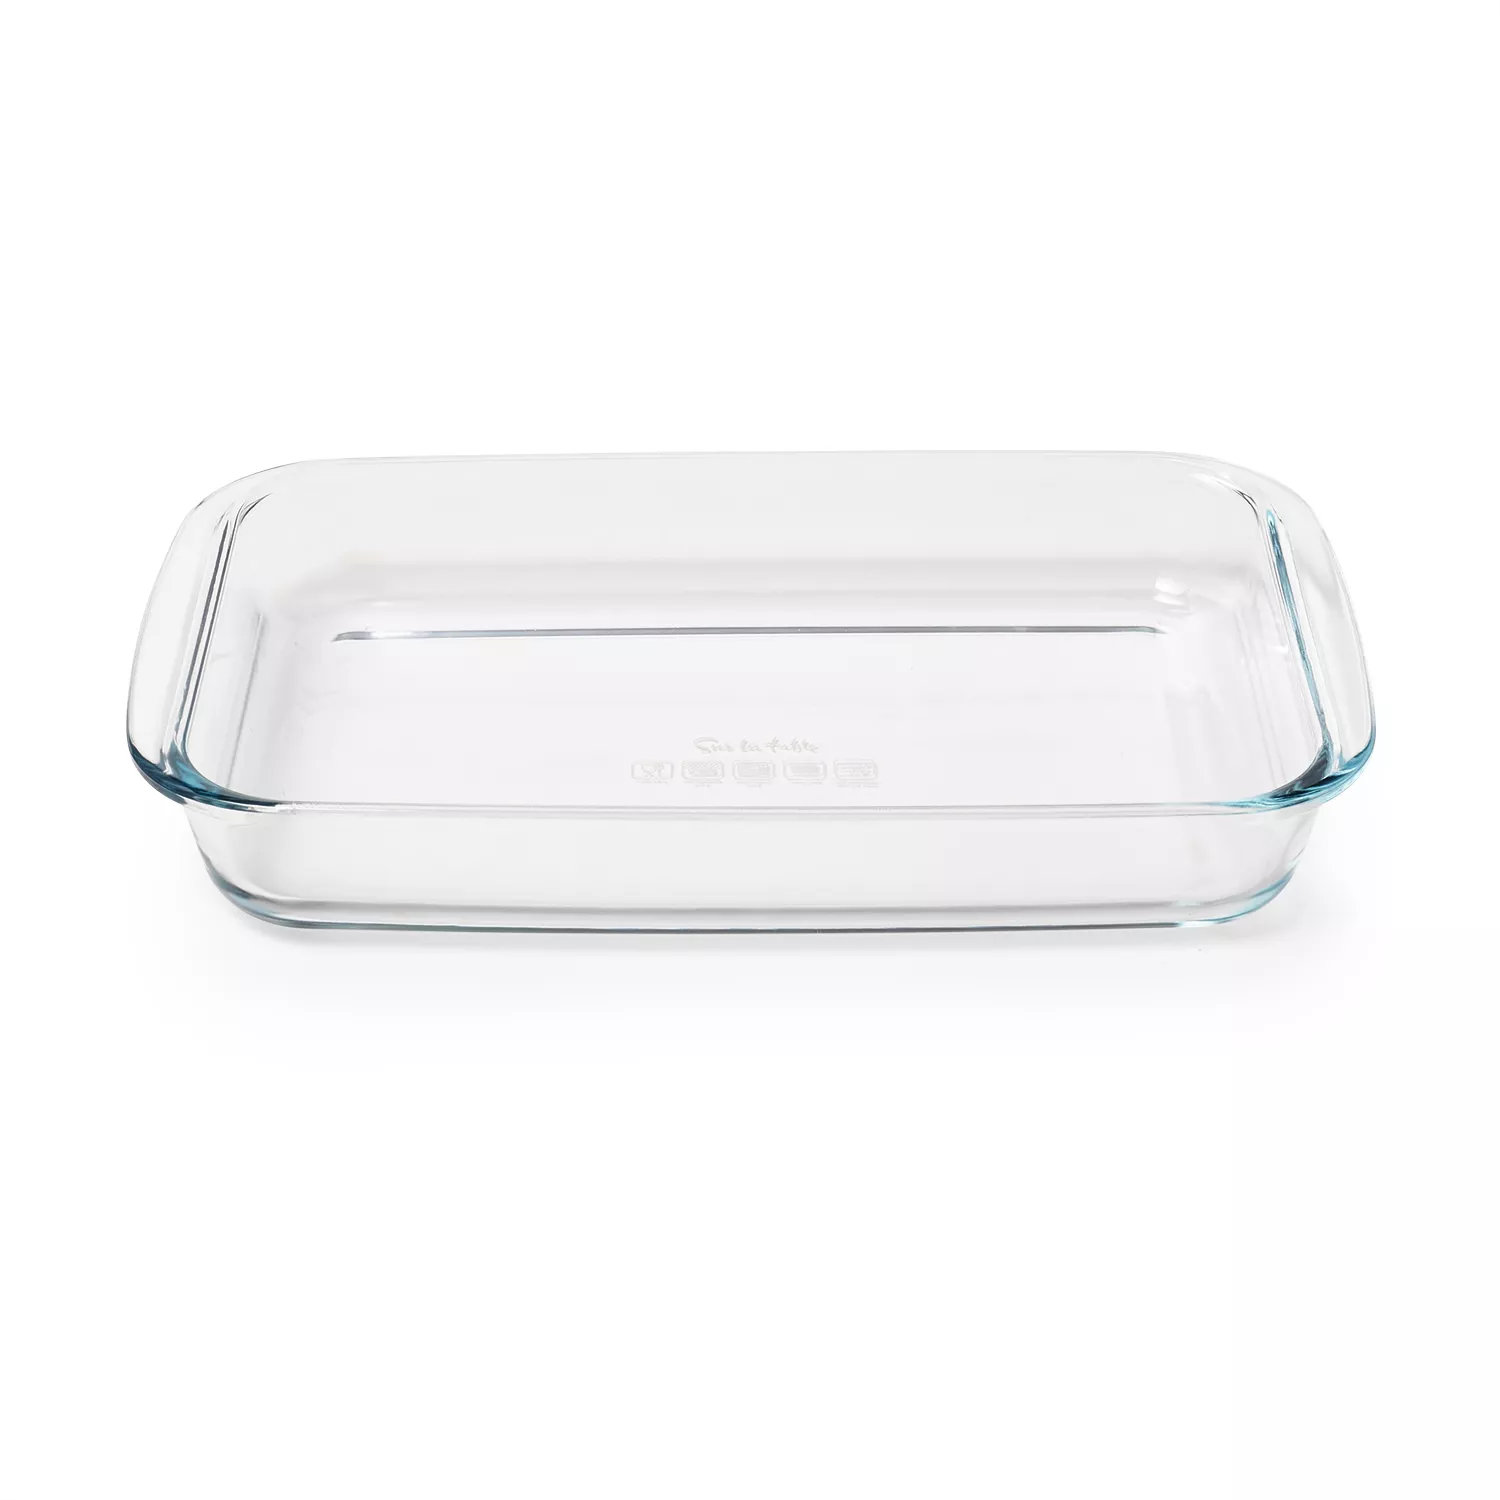 2 Quart Square Glass Baking Dish with Lid